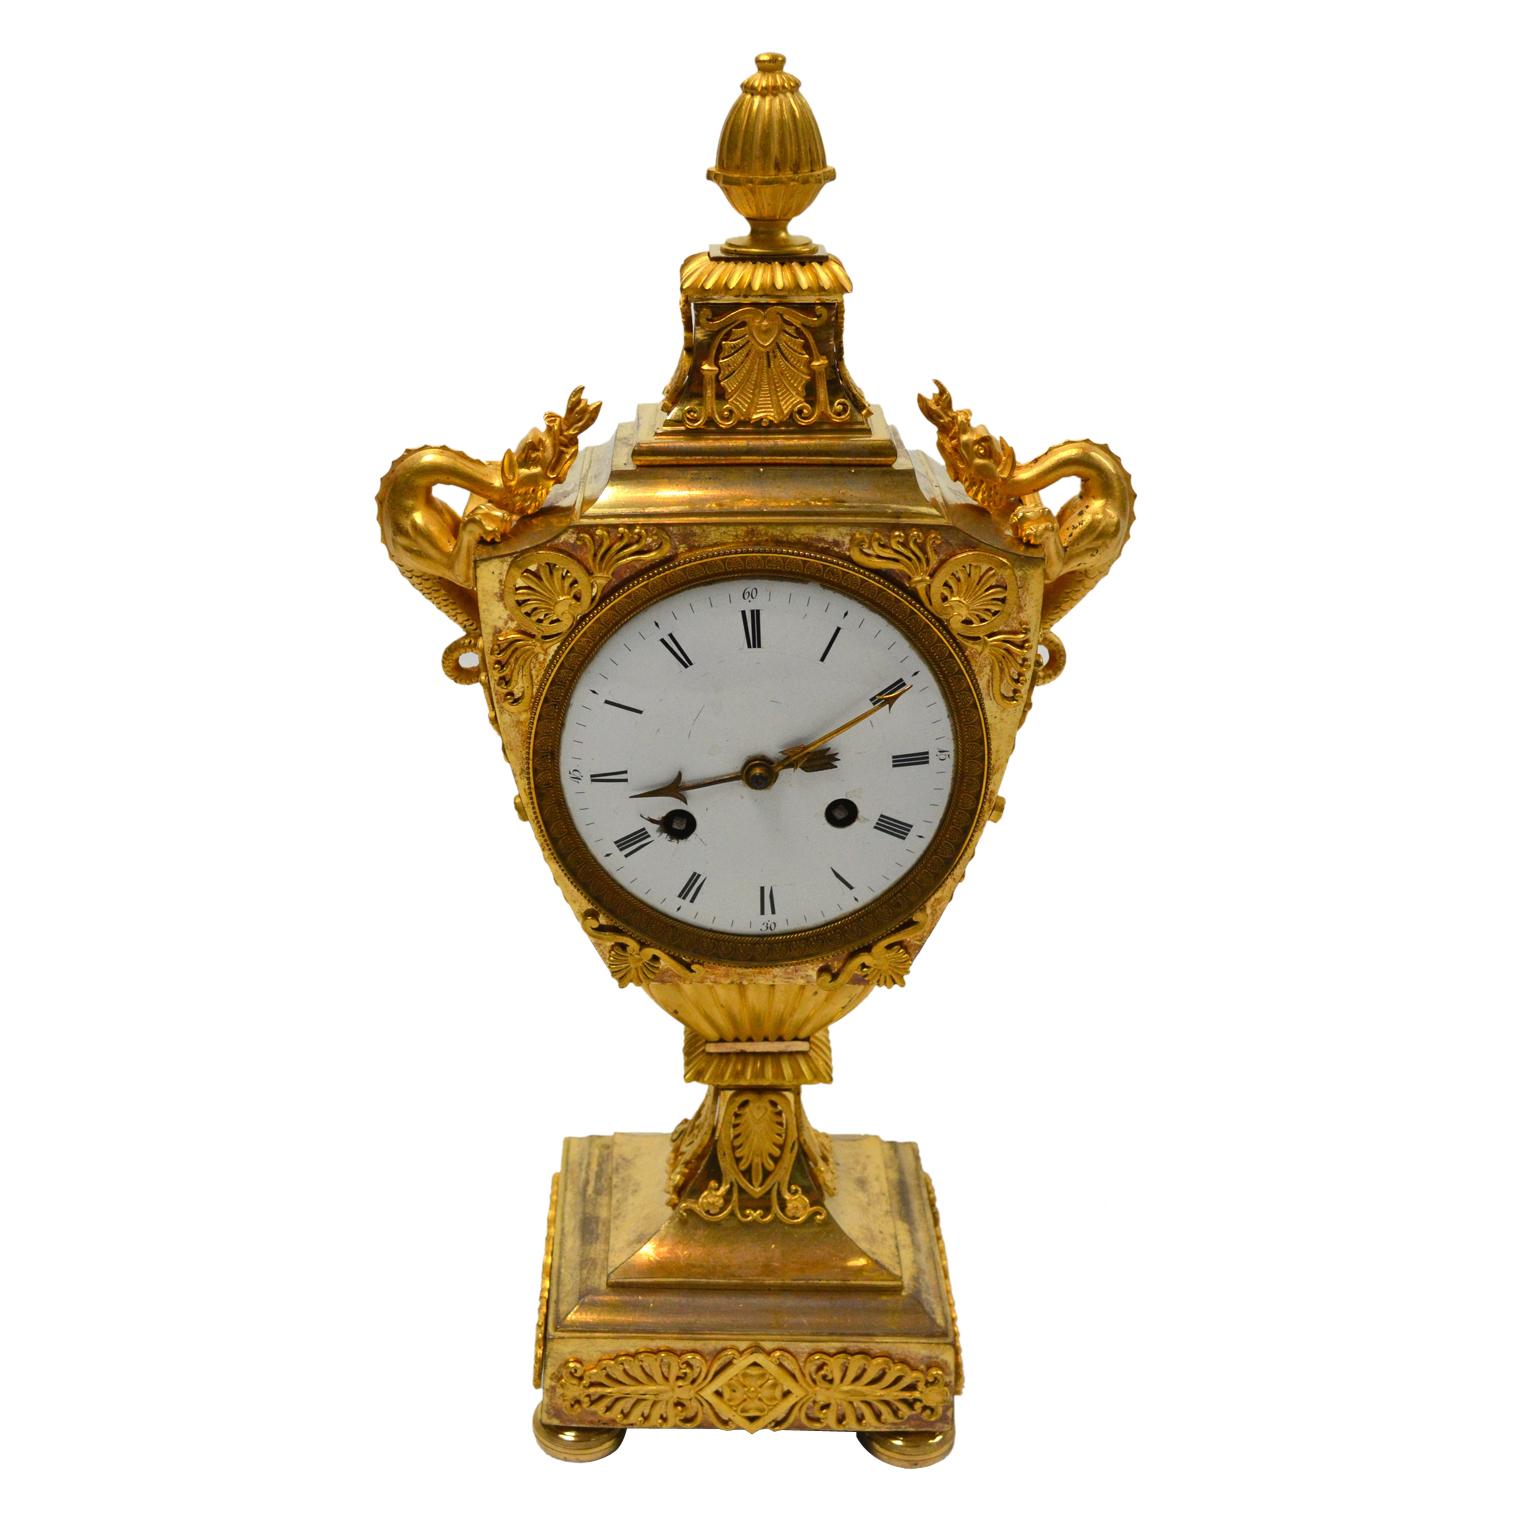 An rare model French Empire mantle clock featuring a classical urn with dragon handles. The clock is entirely of gilded bronze with original fire gilding. The urn-shaped case is surmounted with a pineapple finial; on either side of the 4.5? White